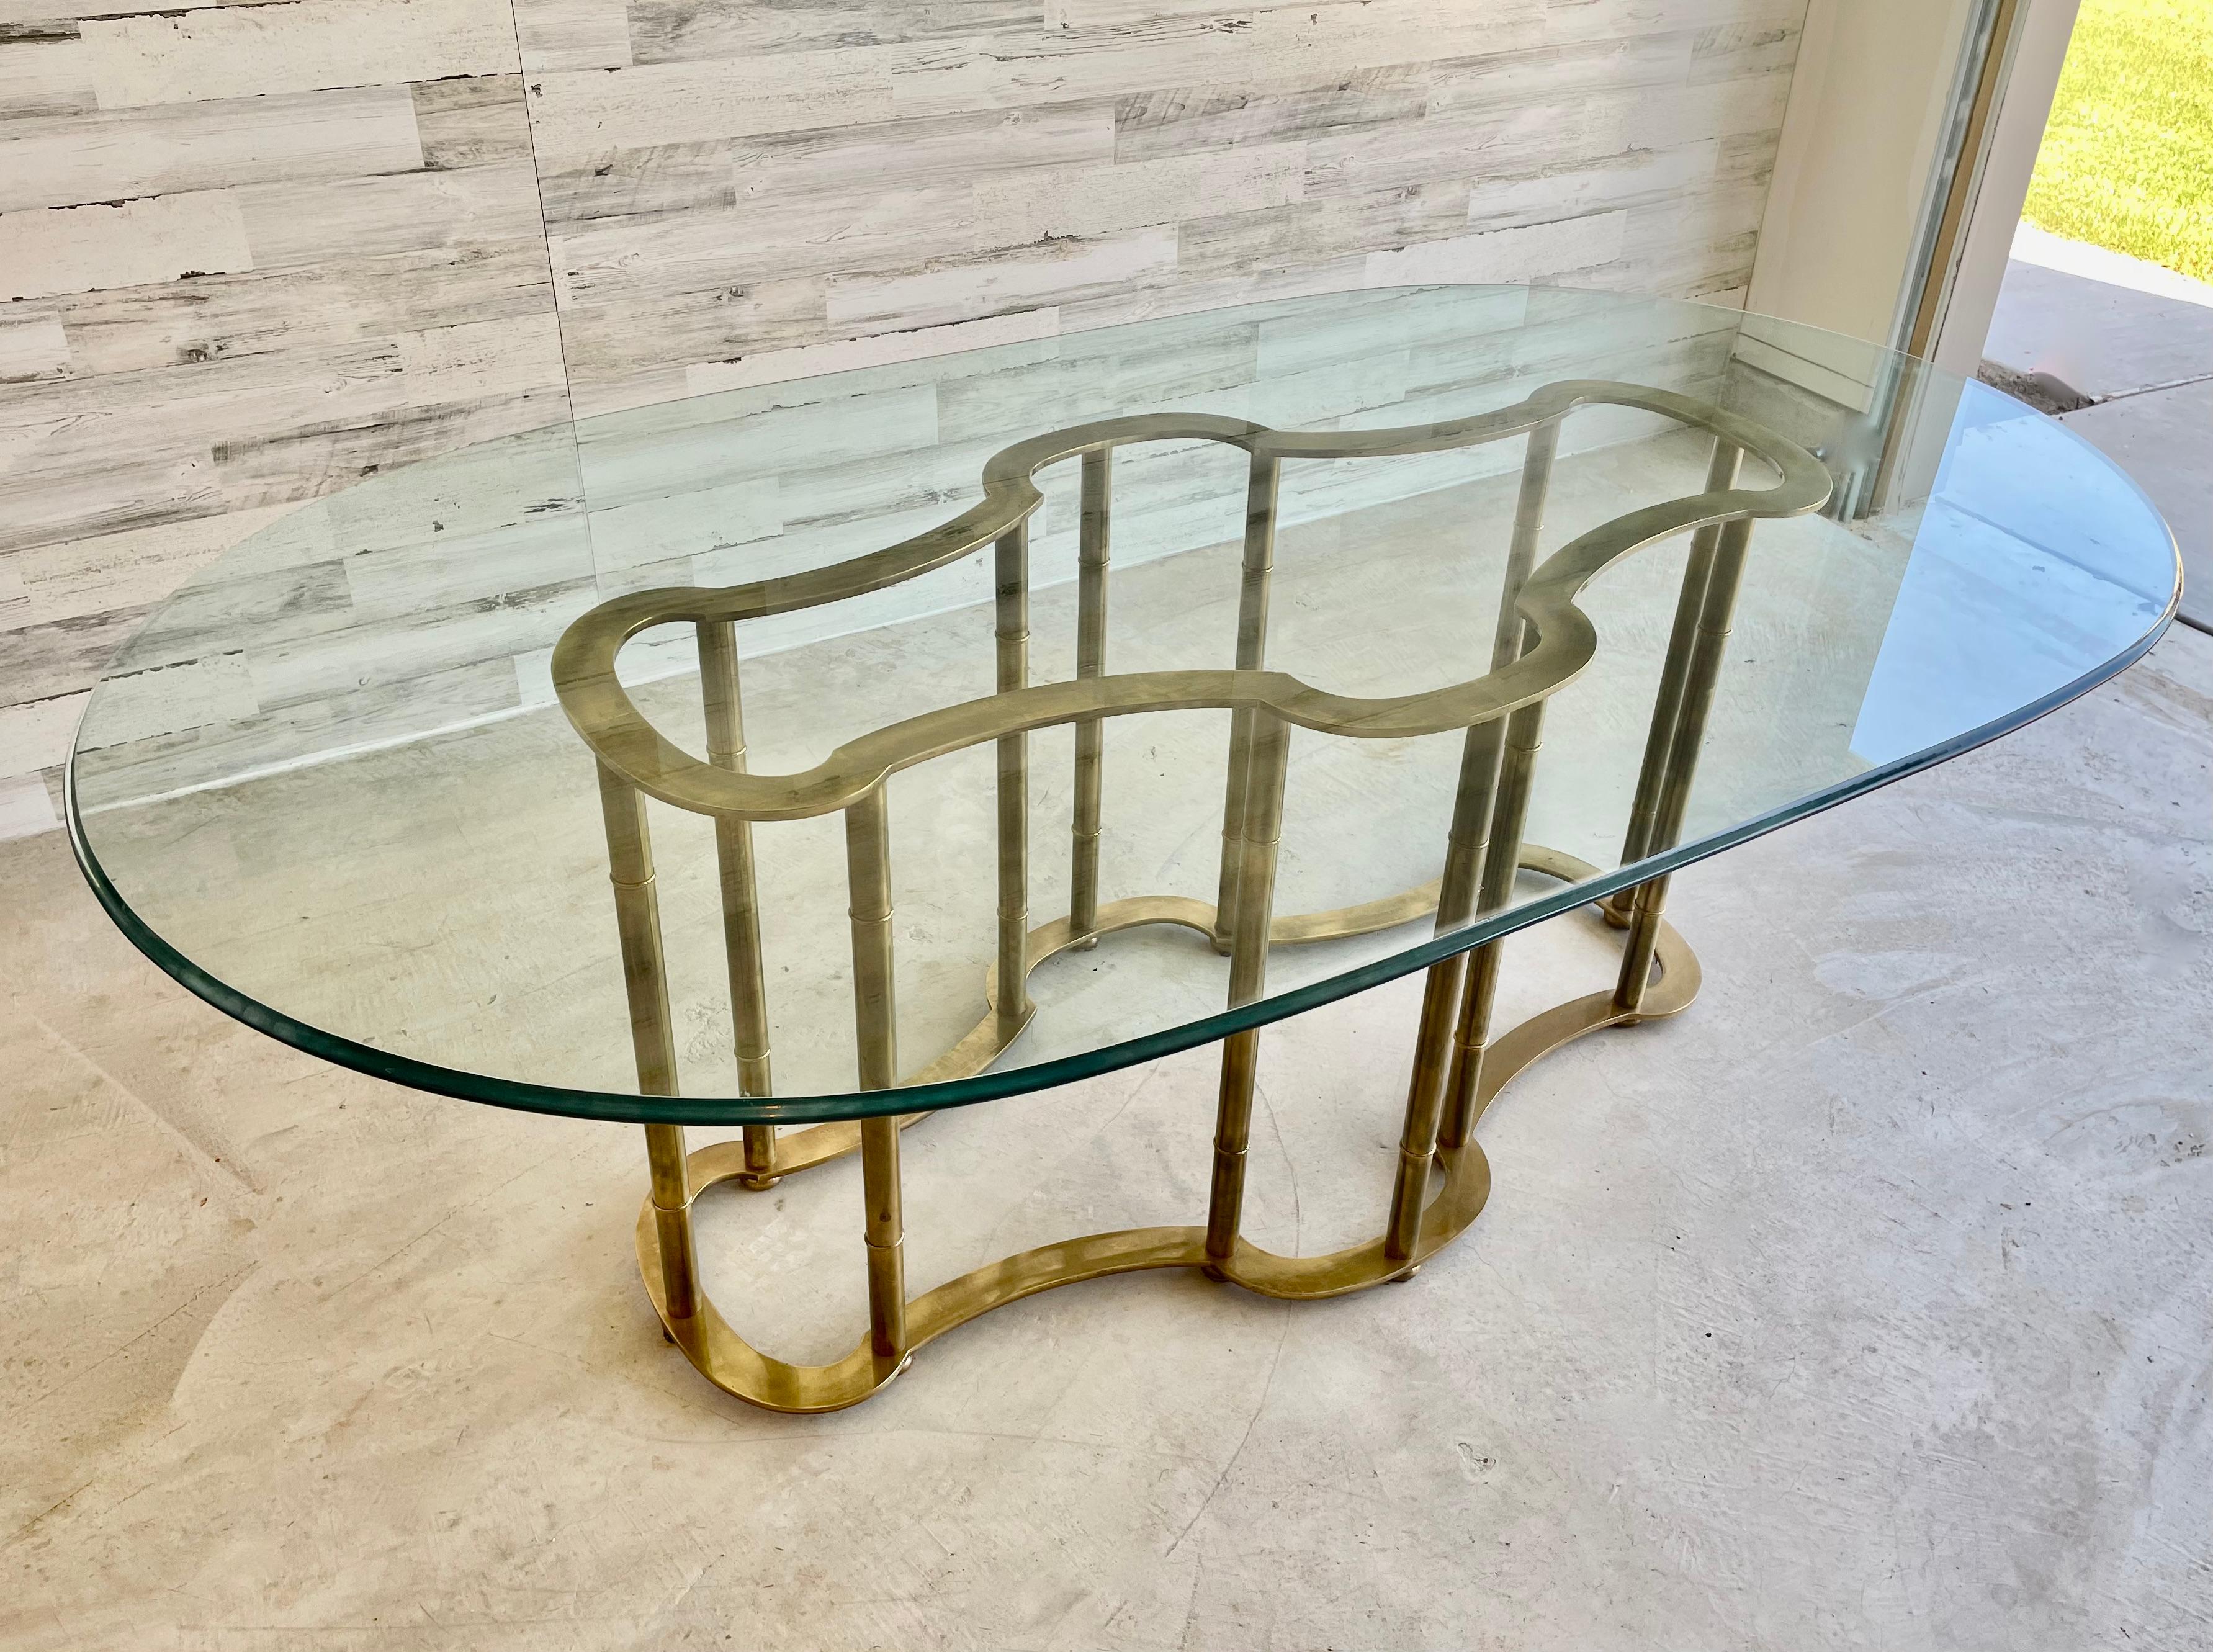 Massive Mastercraft brass base faux bamboo dining table with thick beveled glass top. Original Made in Italy label still attached.
Base measures: 55.25 L x 27.5 D x 28.25 H.